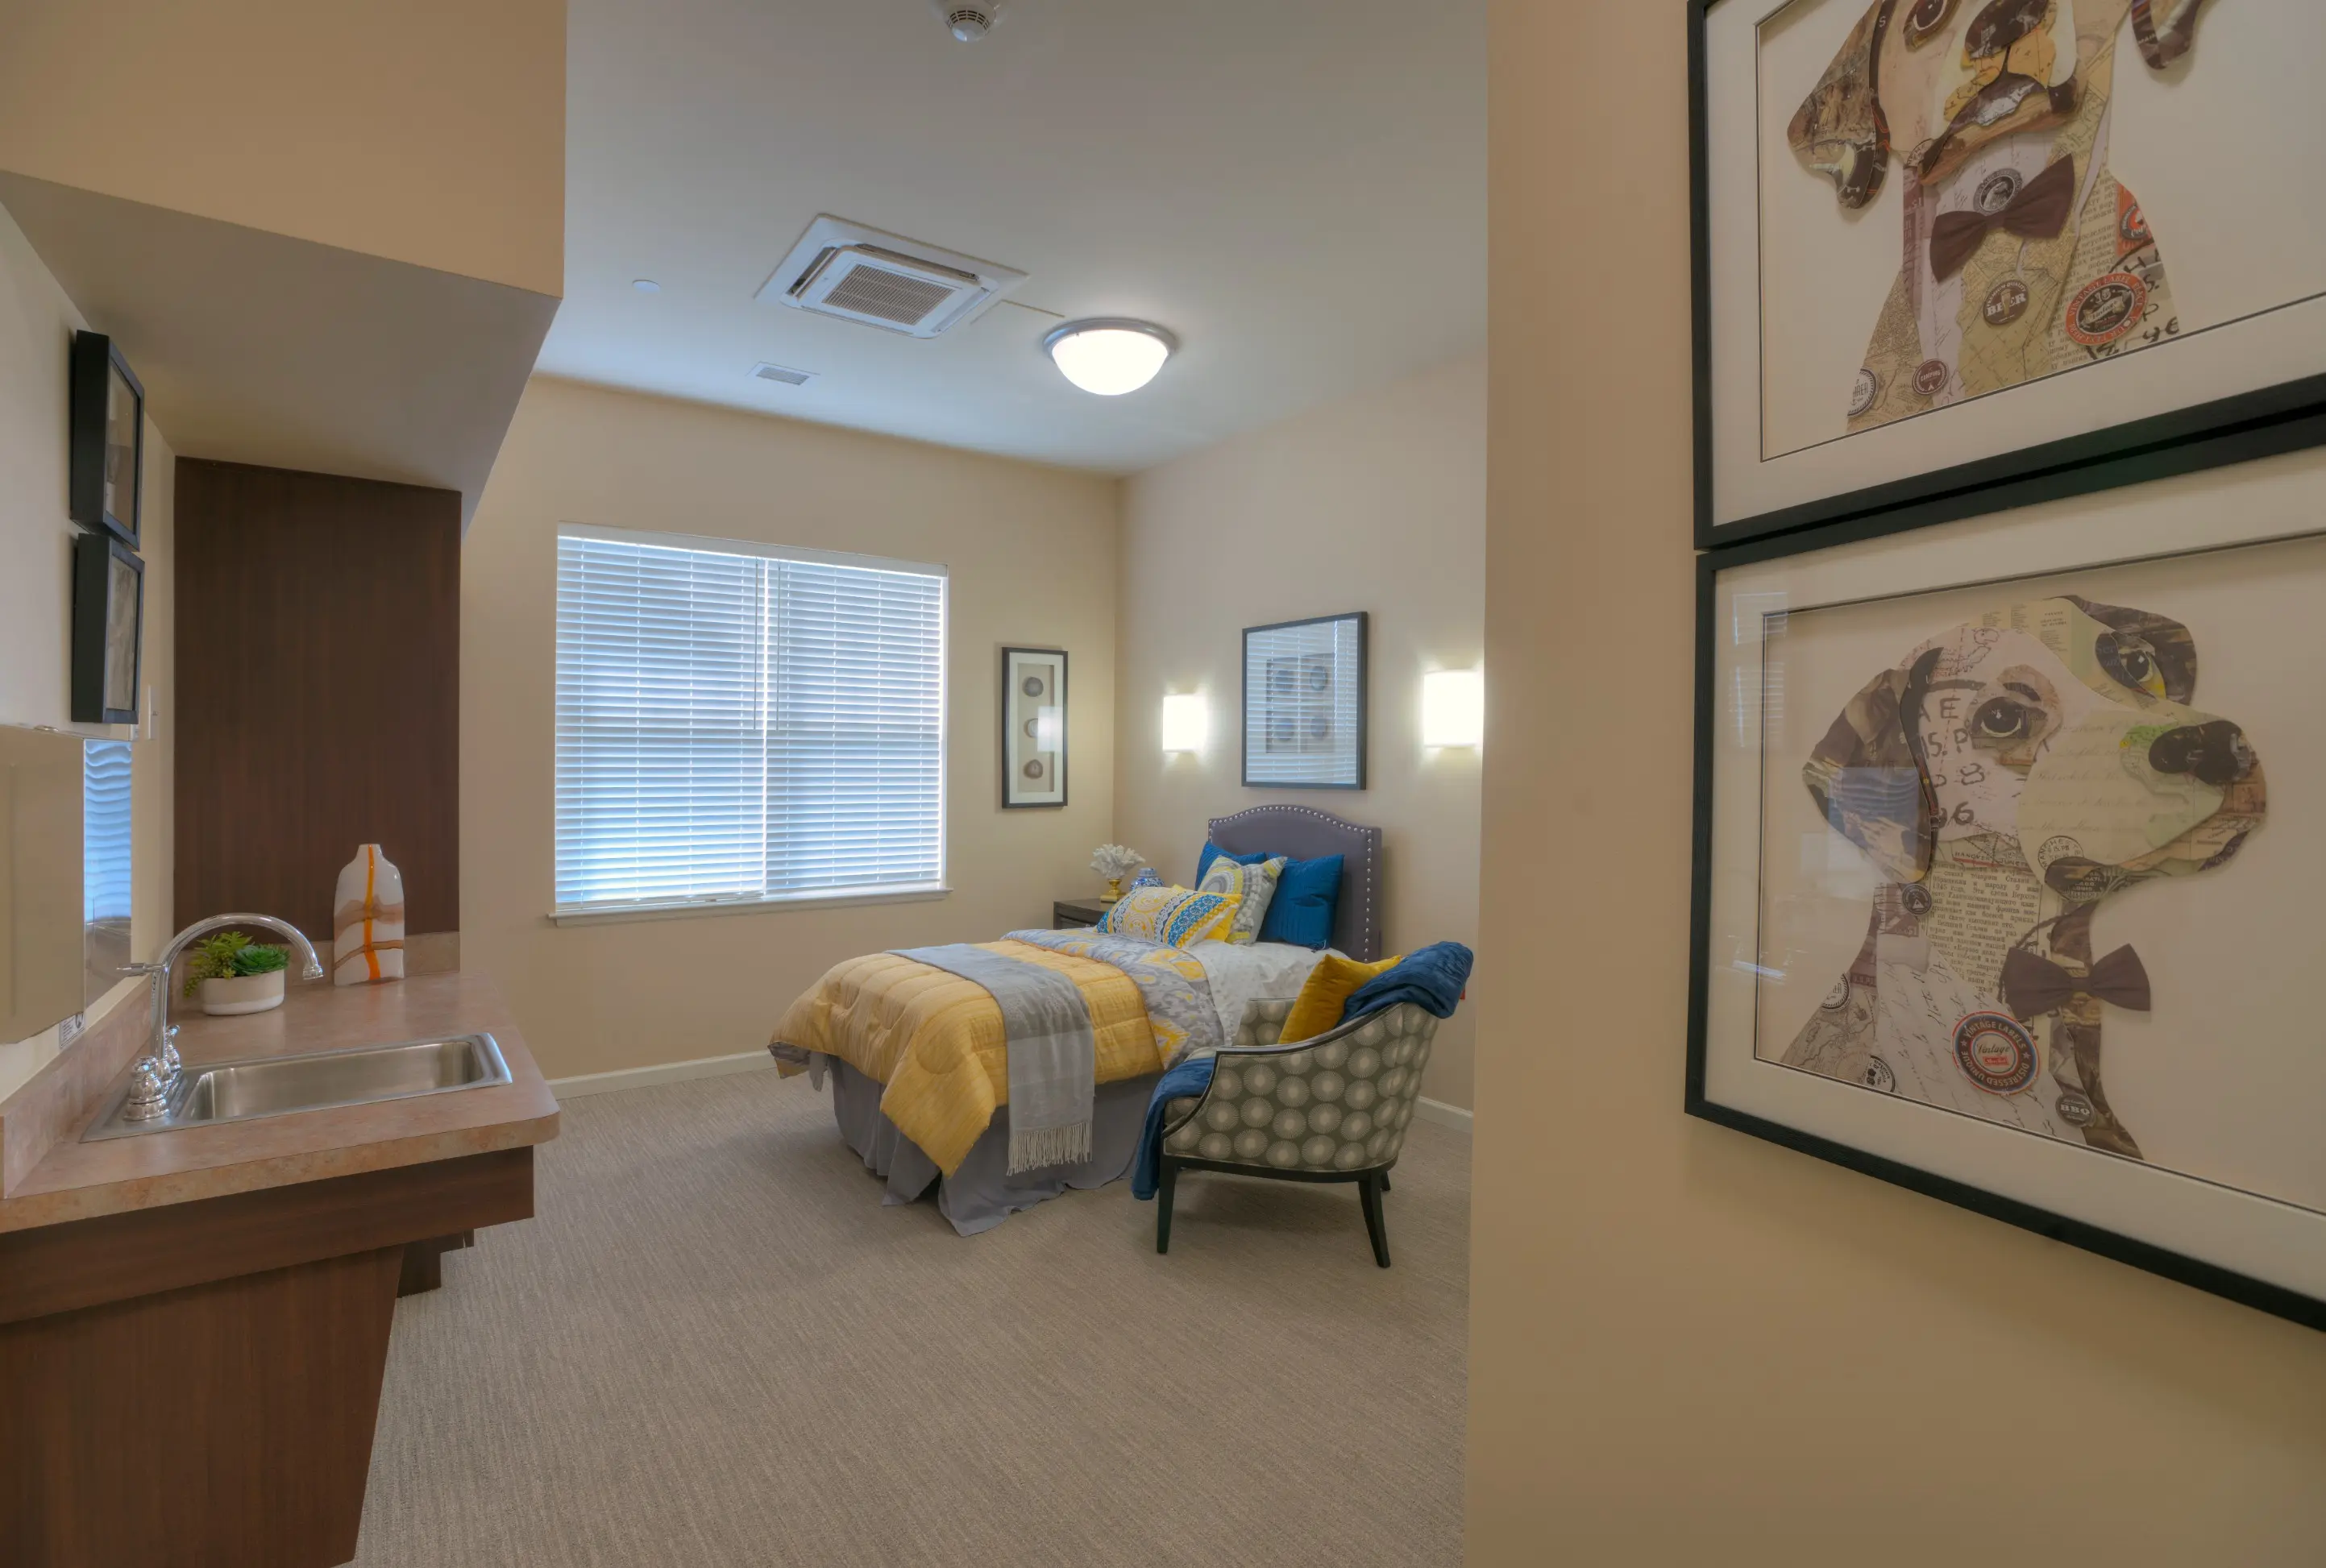 Bedroom of a senior apartment at American House Freedom Place Roseville, a memory care community in Roseville, Michigan